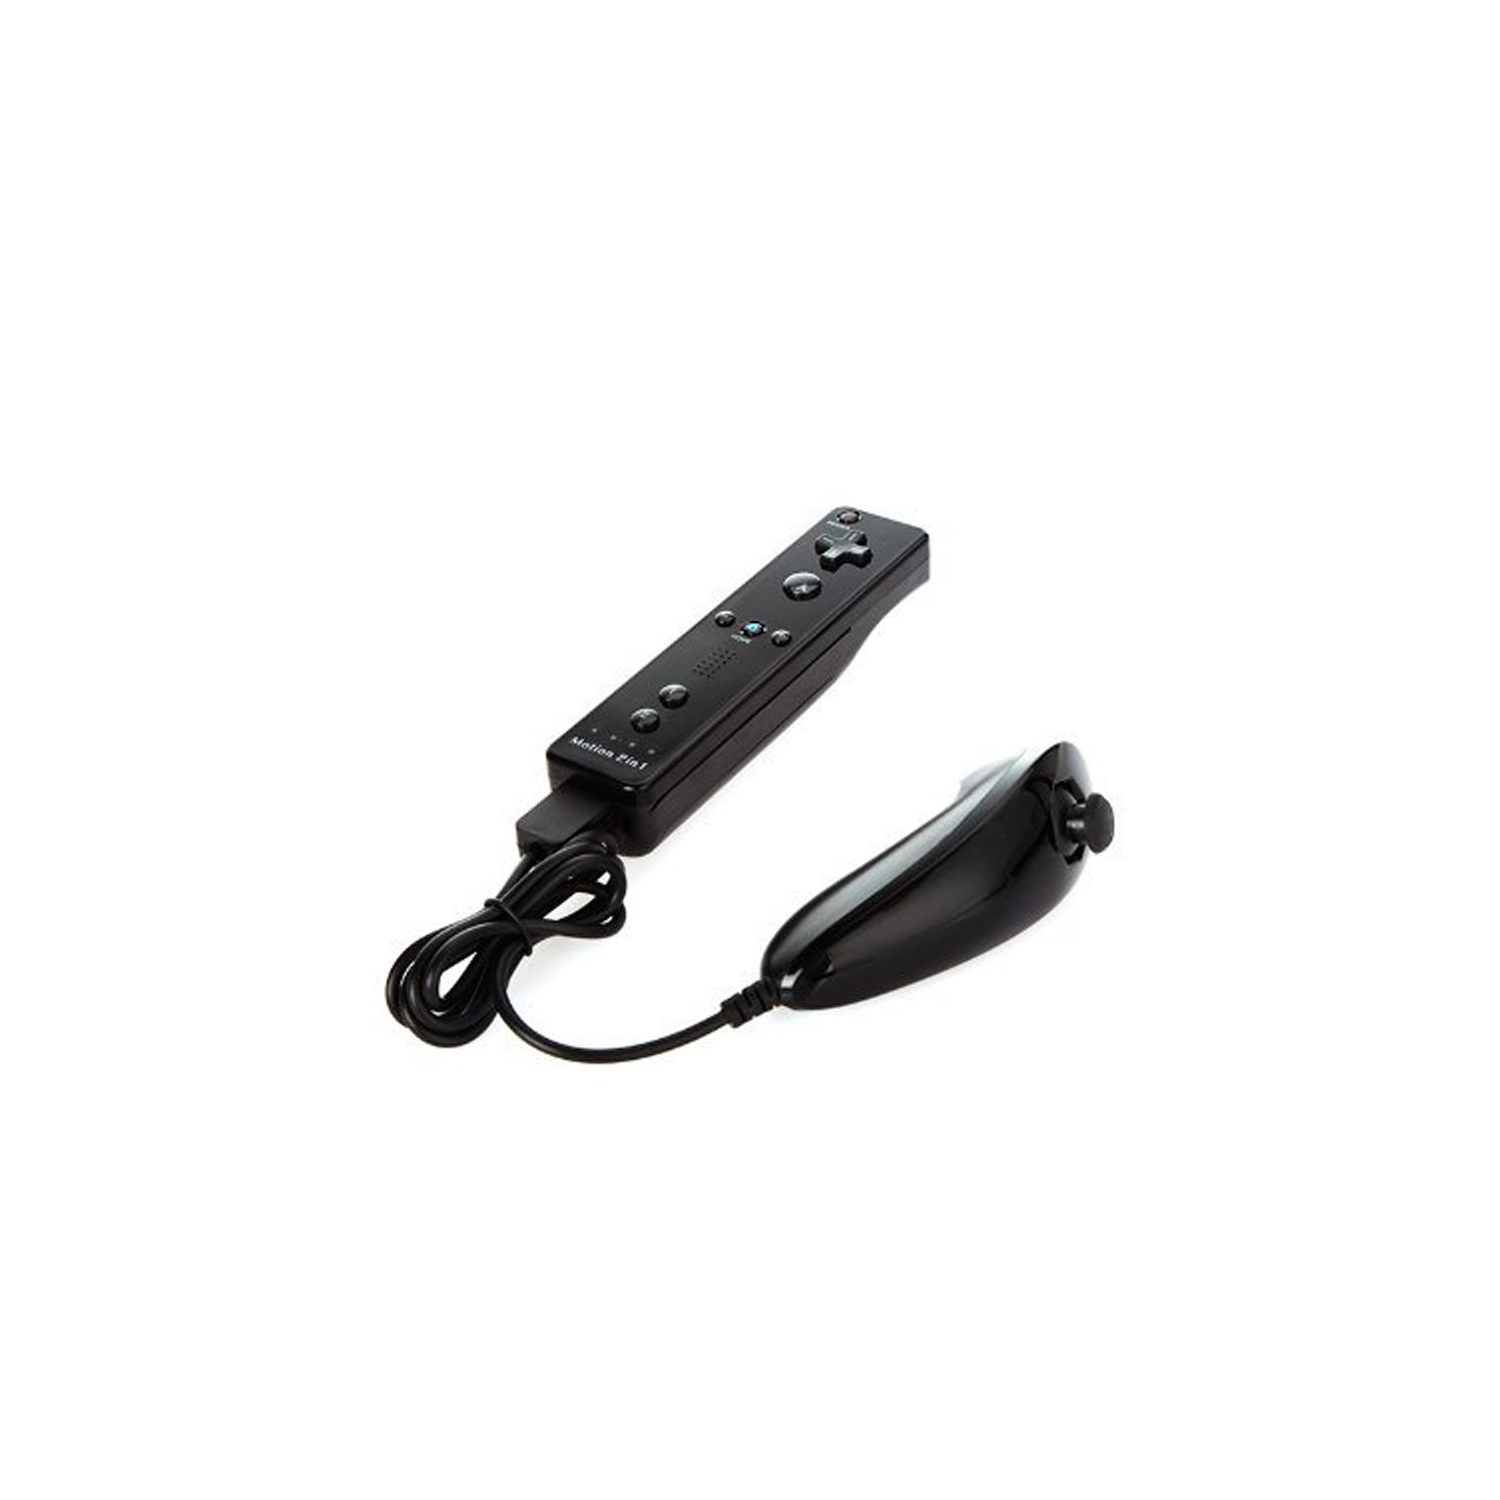 Controller Wii Remote & Nunchuk With Motion Plus (Black) (Generic)